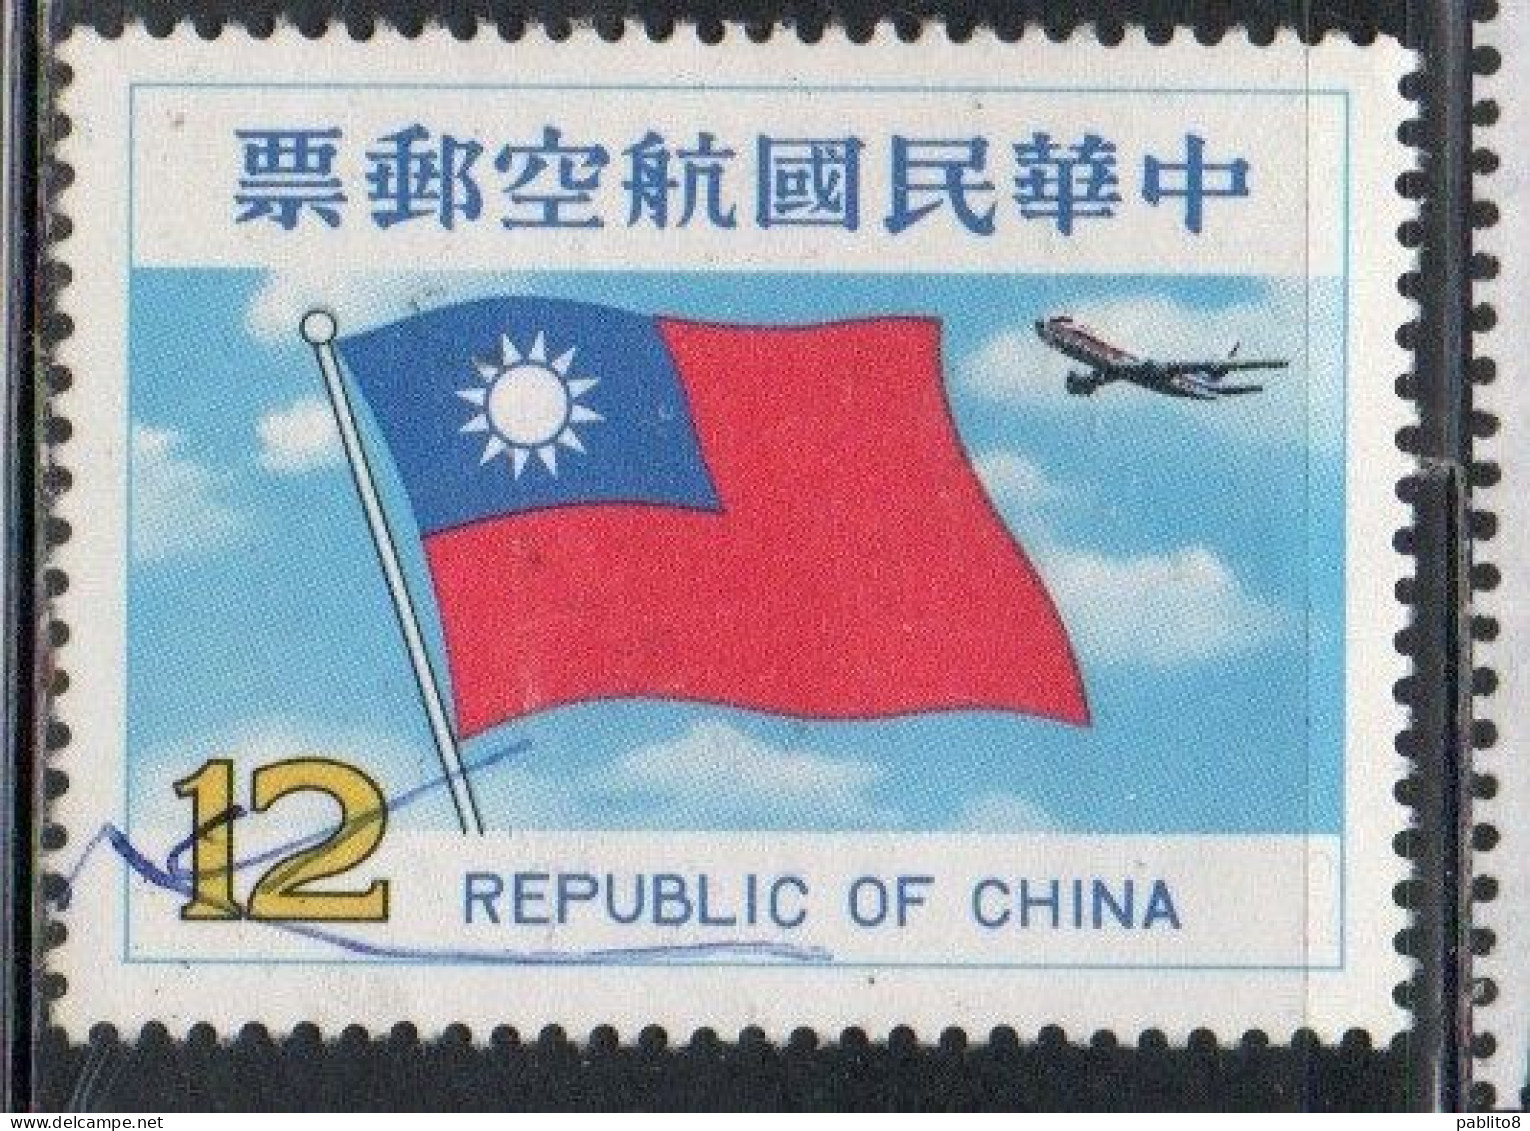 CHINA REPUBLIC CINA TAIWAN FORMOSA 1980 AIR POST MAIL AIRMAIL NATIONAL FLAG JET 12$ USED USATO OBLITERE' - Poste Aérienne